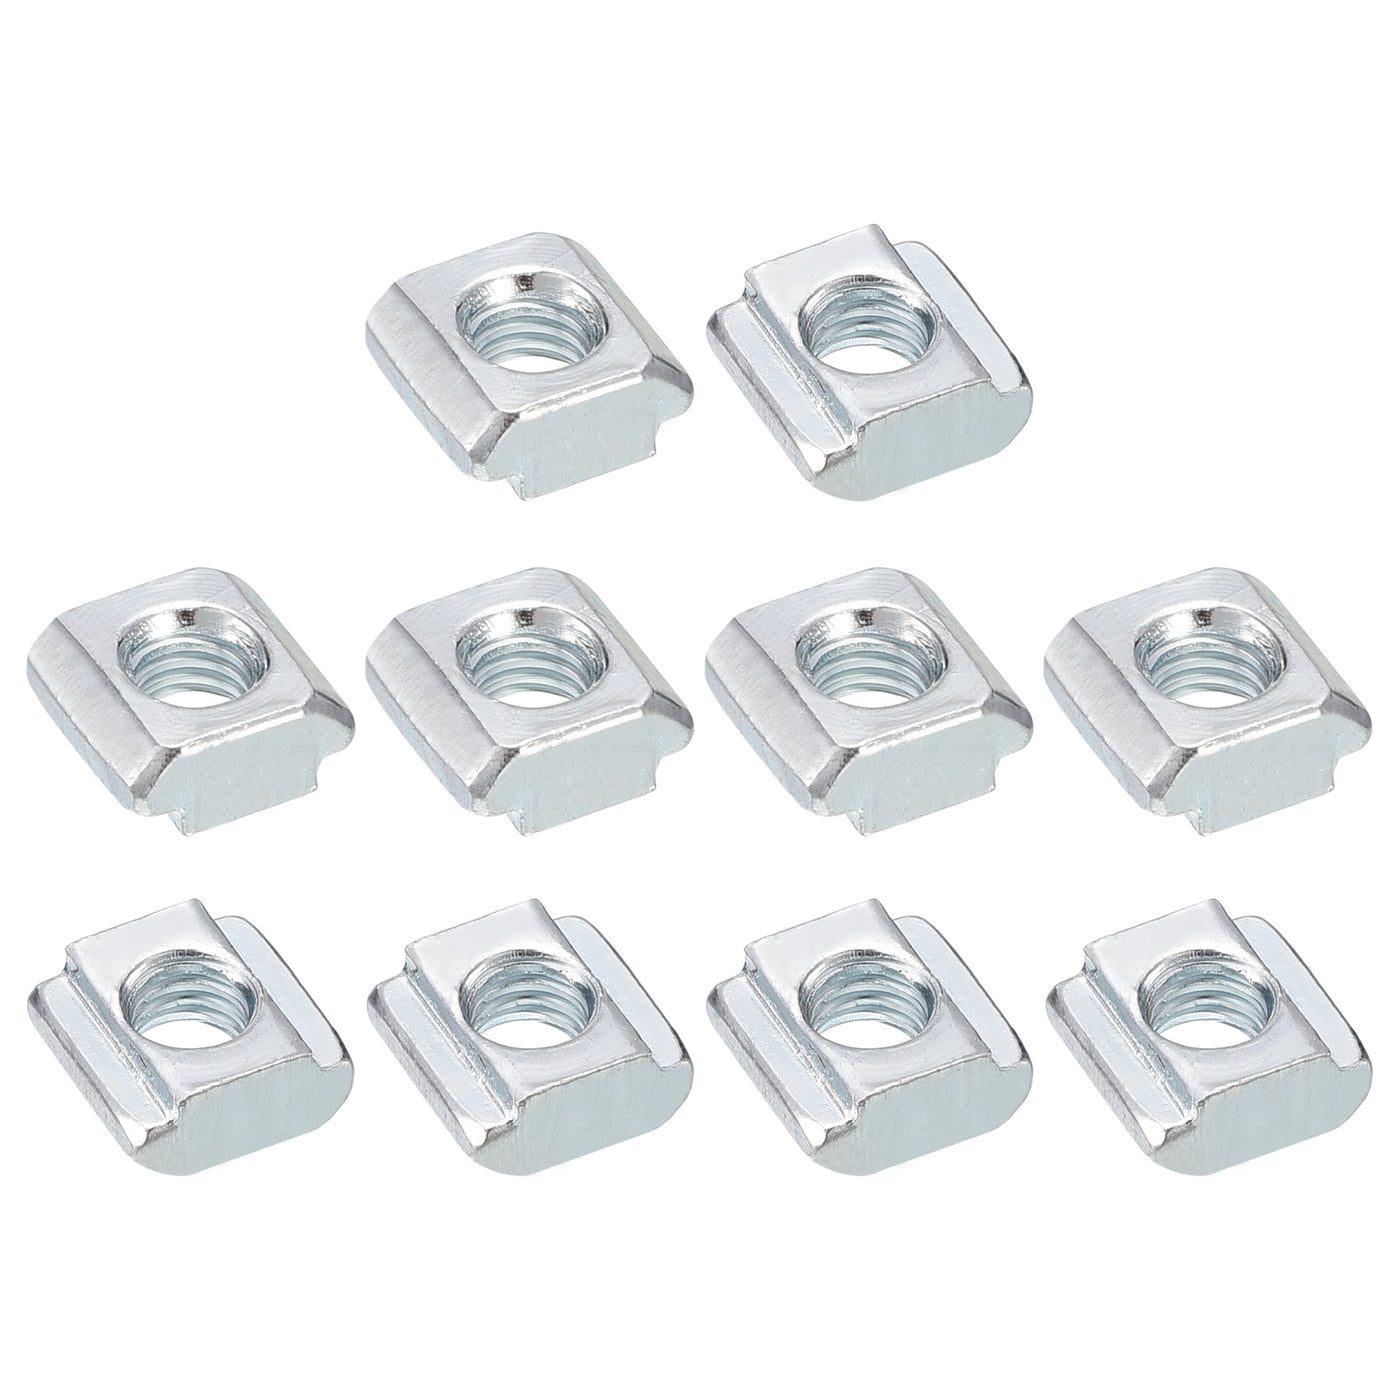 uxcell Uxcell T Nuts, 30pcs - Nickel Plated Carbon Steel T Slot Bolts, 2020 Series M5 Hammer Head Fastener, Sliding T Nuts for Aluminum Extrusion Profile (Silver)